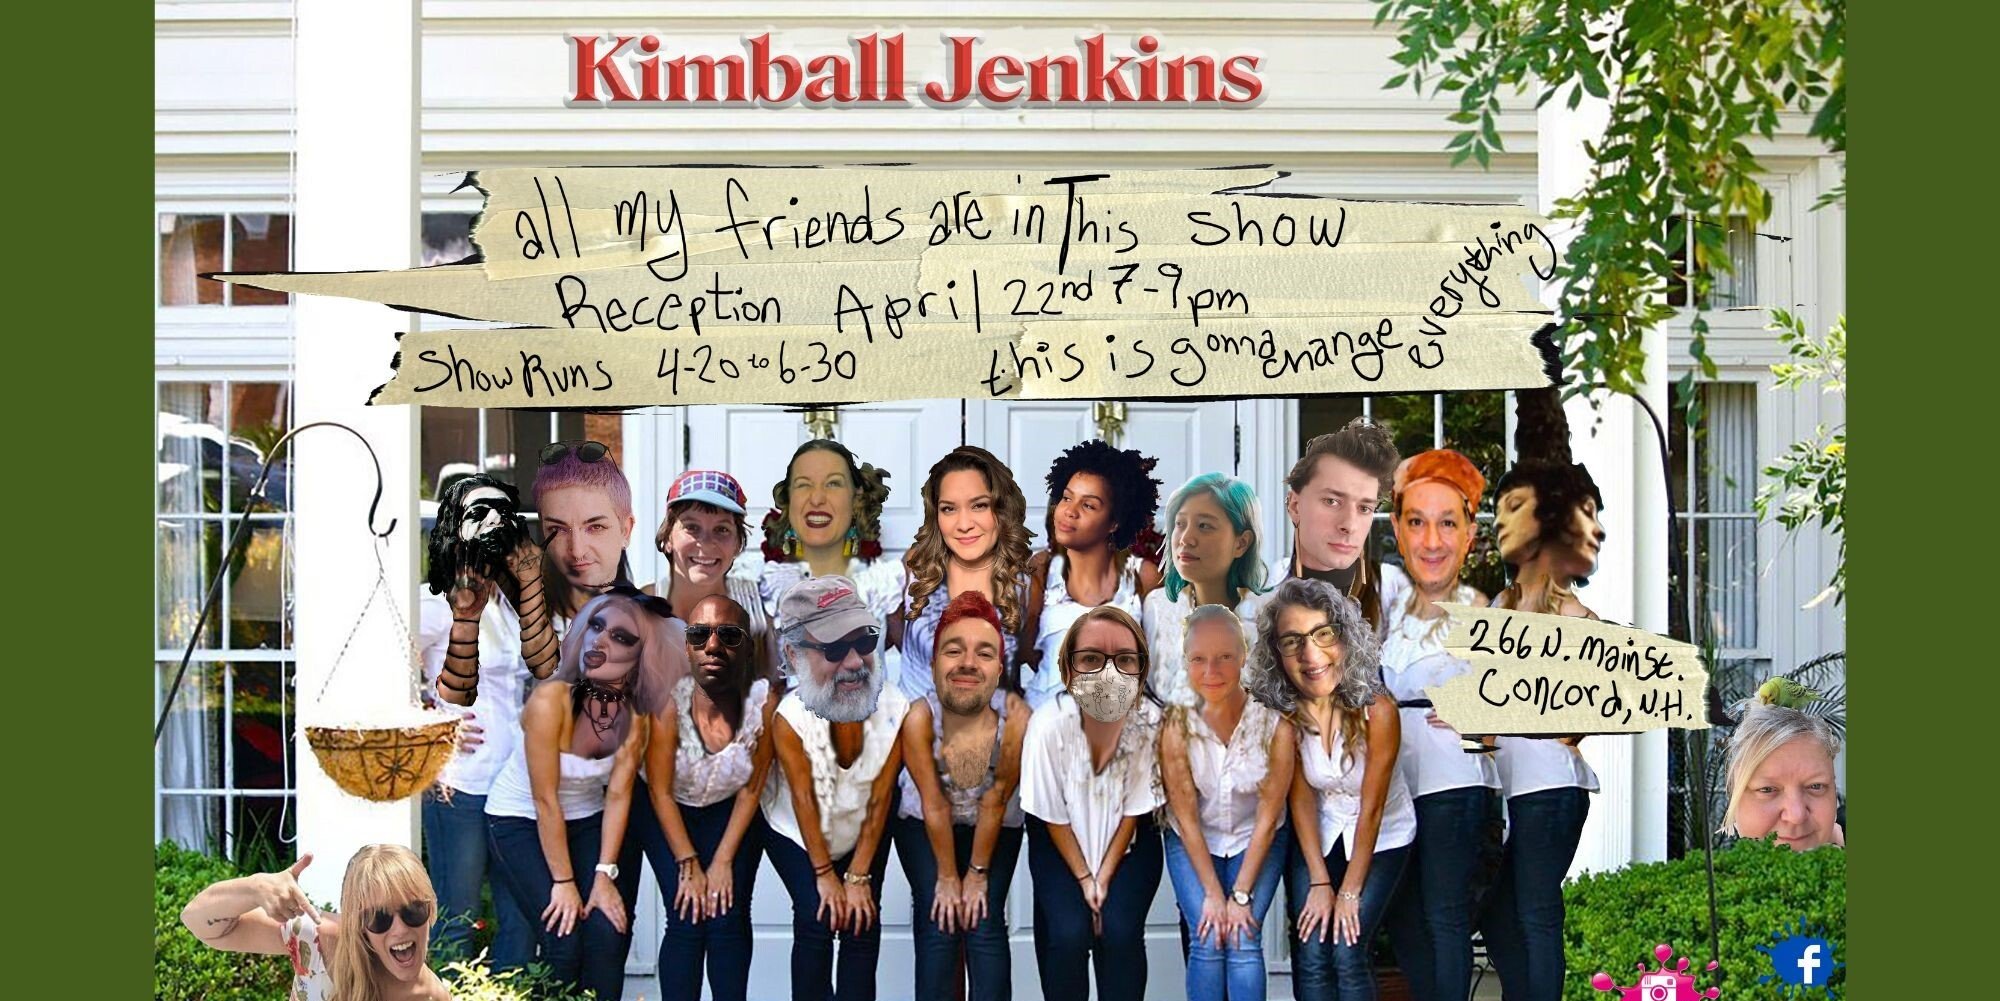 all my friends are in This show — Kimball Jenkins pic